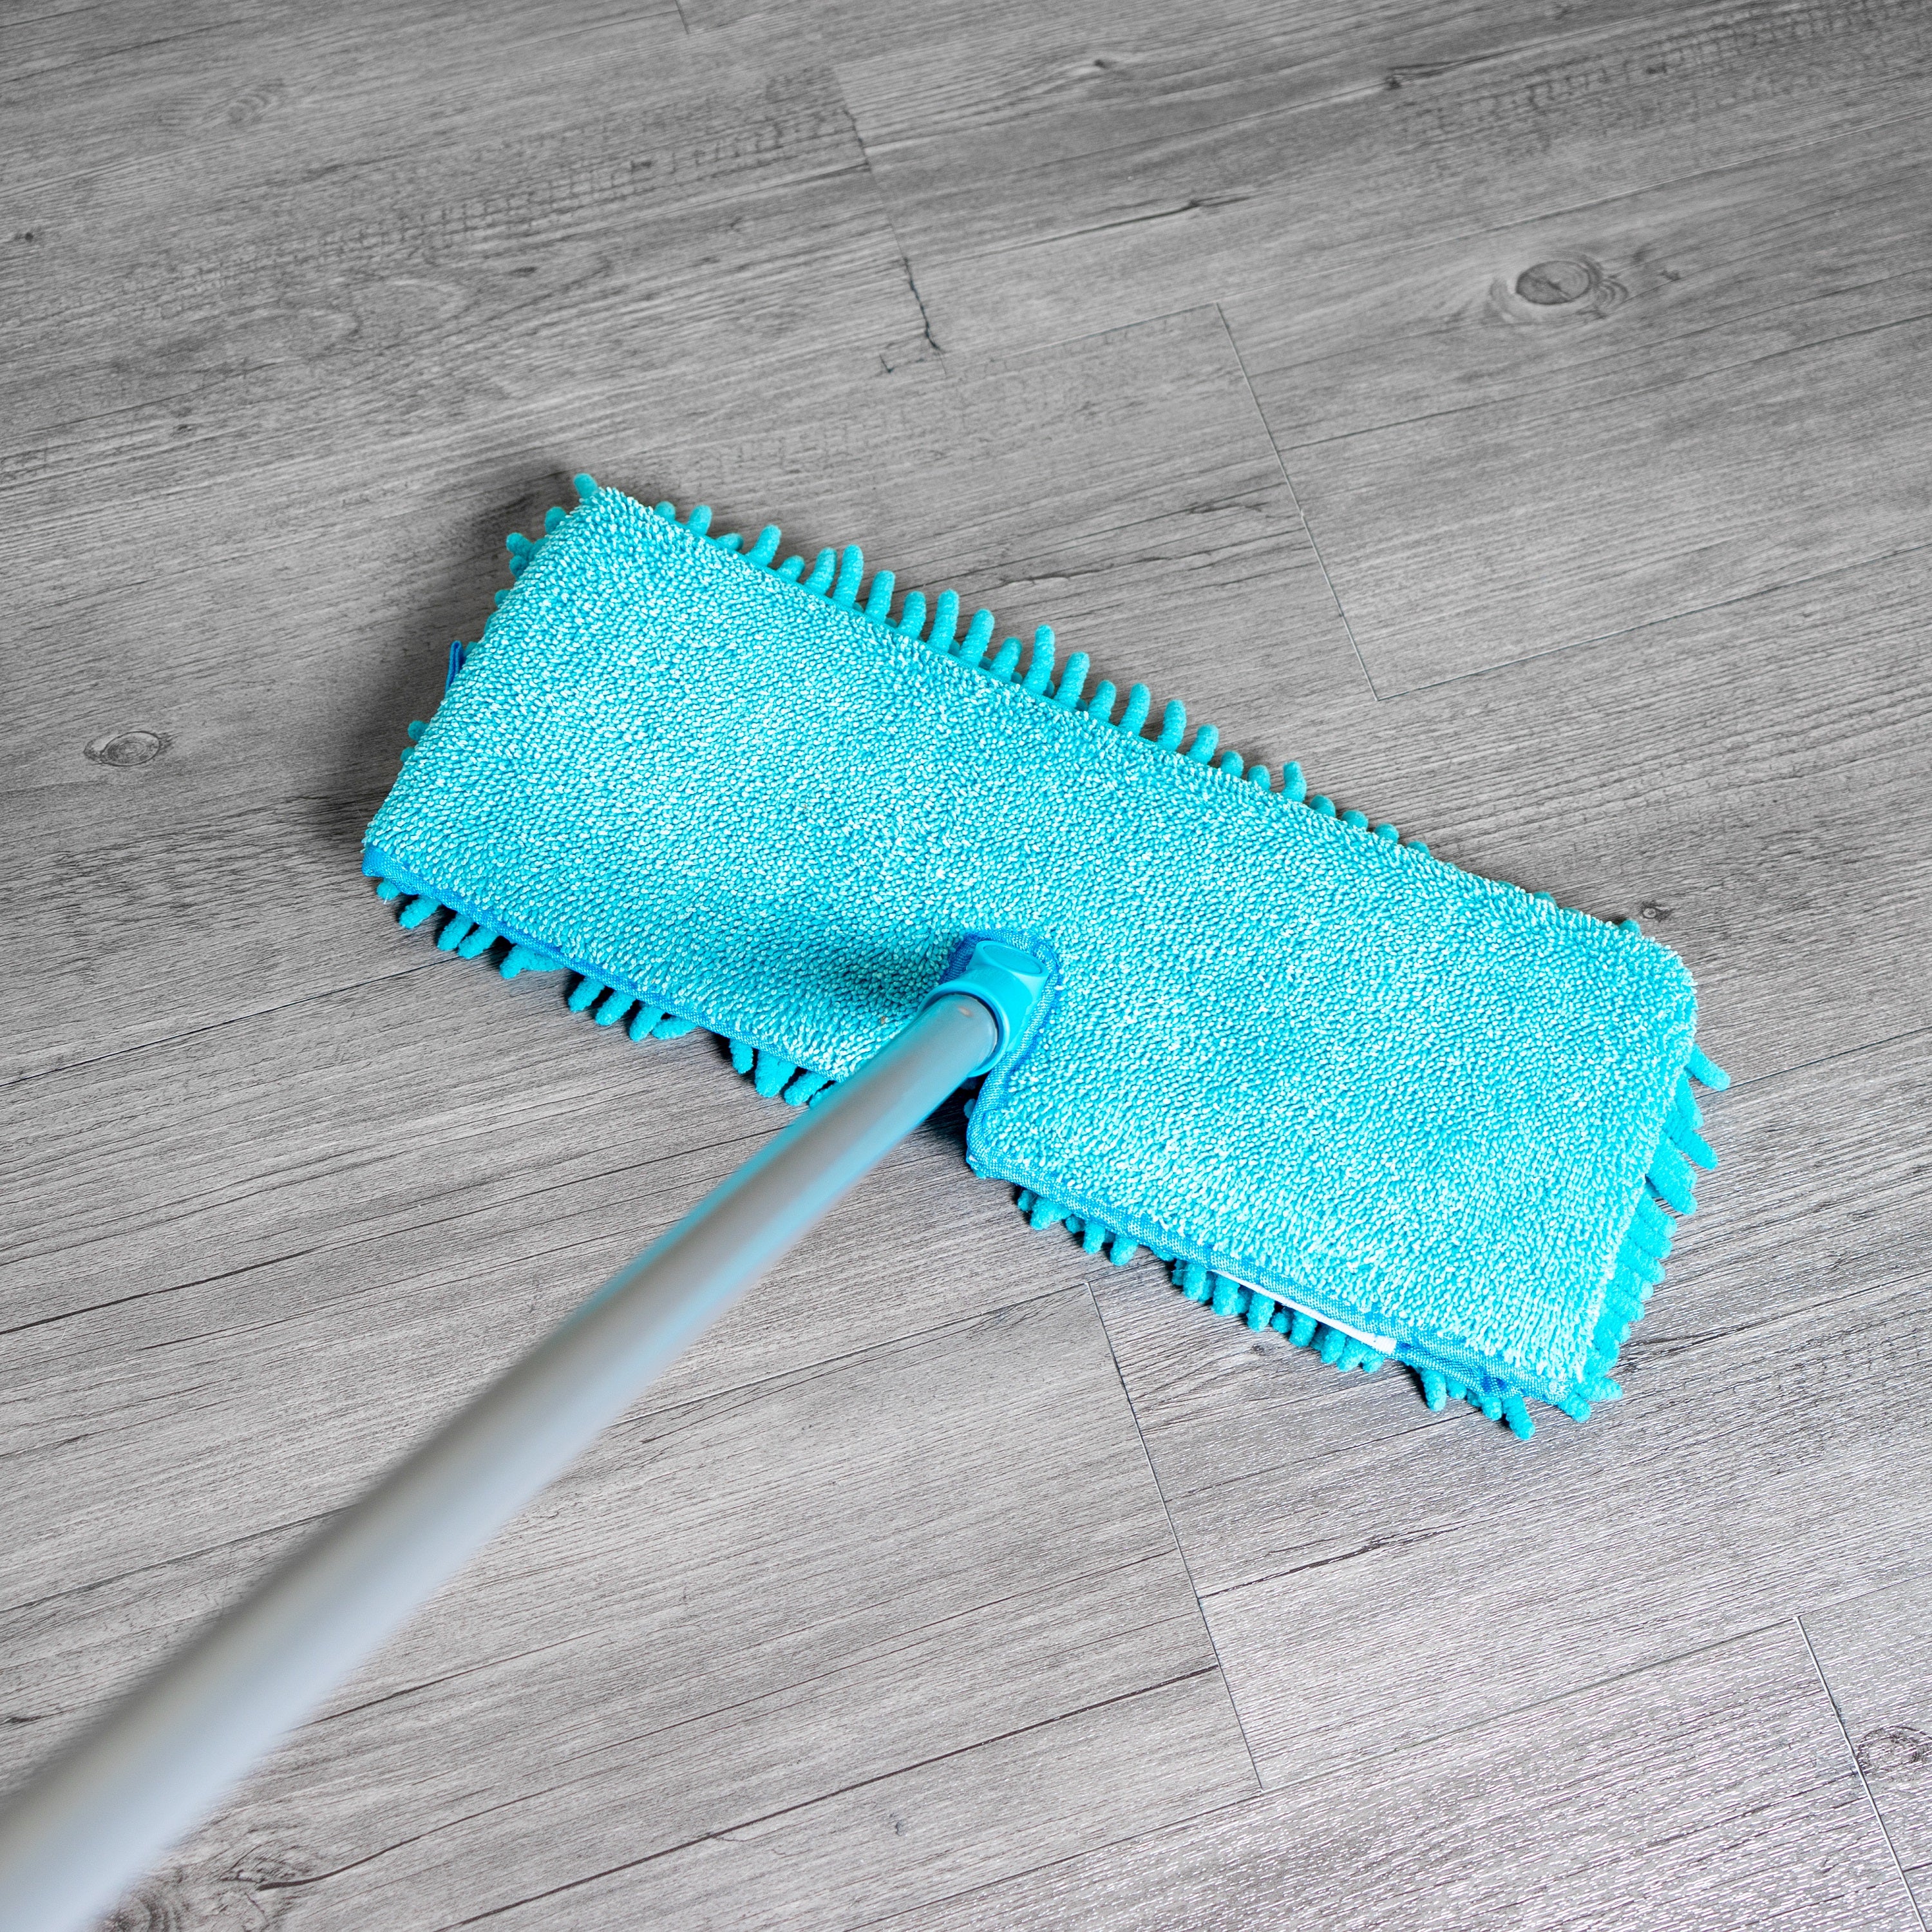 Fuller Brush Dynamic Duo Micro Mop - for Wet & Dry Floor Cleaning - Cleans Hardwood, Laminate Wood & Tile Floors (Duo Mop Complete)